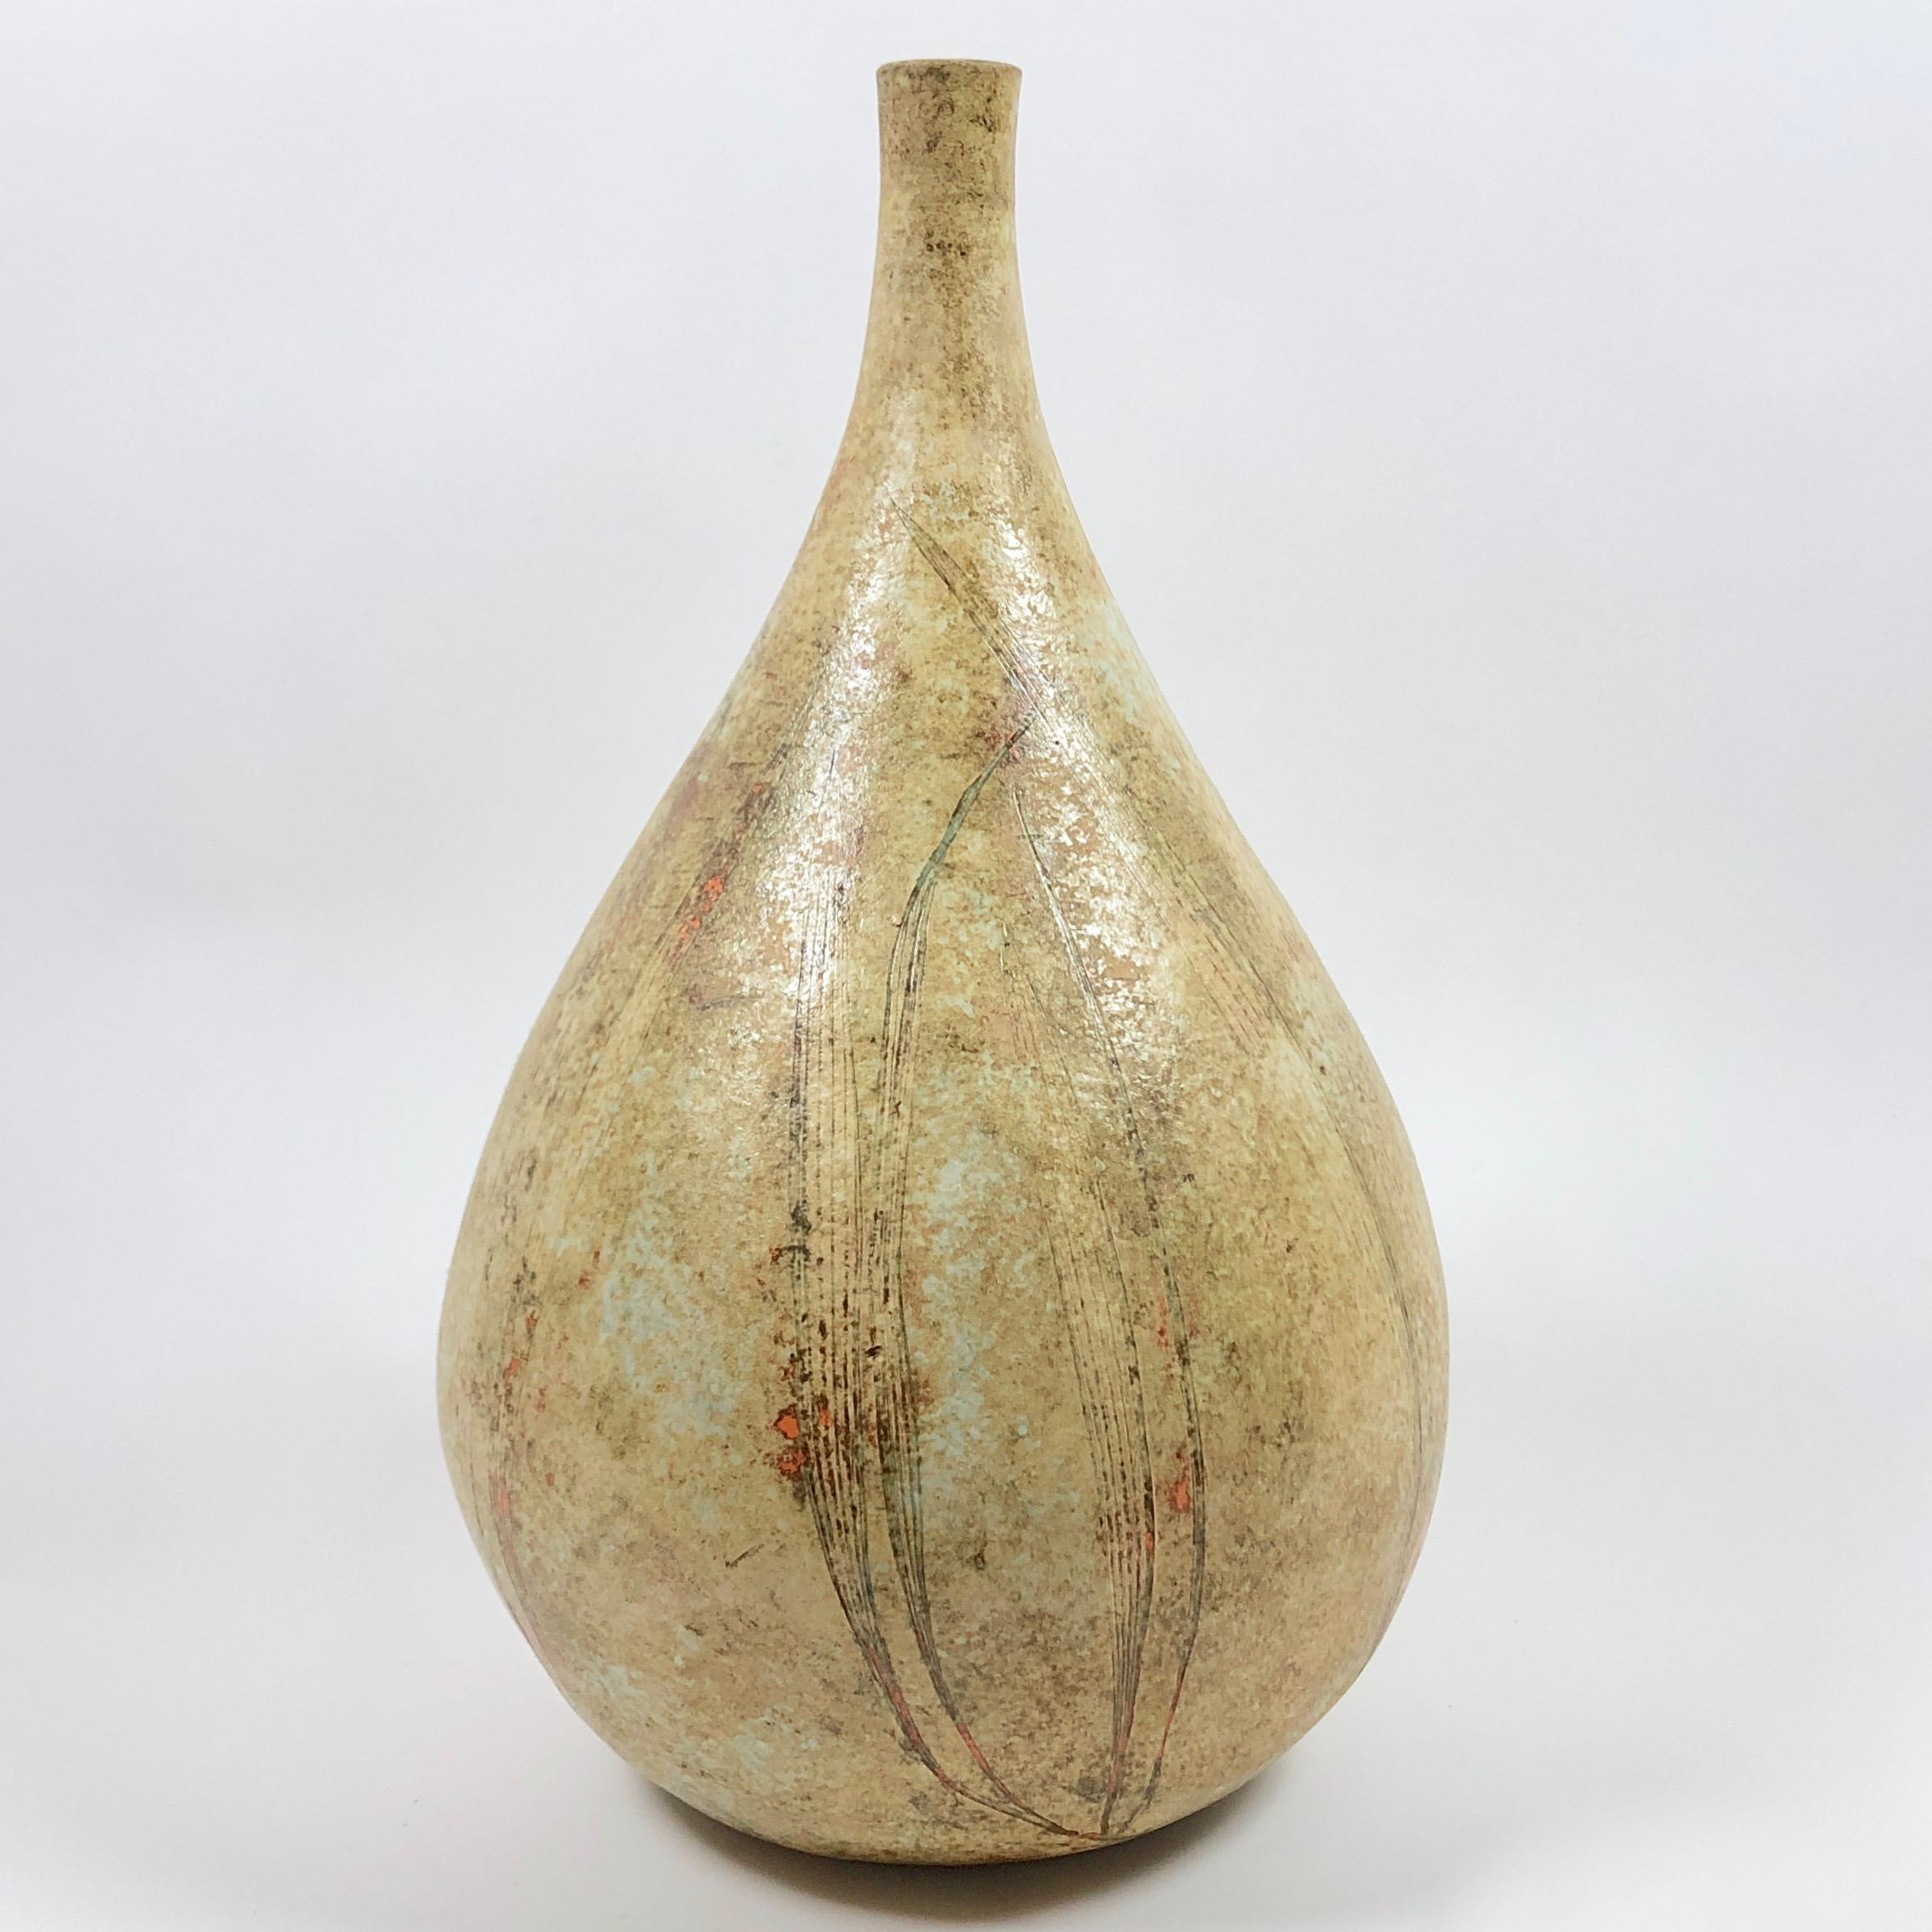 Rare and important drop ceramic bottle, forming a table lamp base.
Ceramic glazed in shades of cloudy mustard, beige, pale brown and orange spots, decorated with abstract designs, or leaves, engraved on all sides.
Ceramic signed by the French